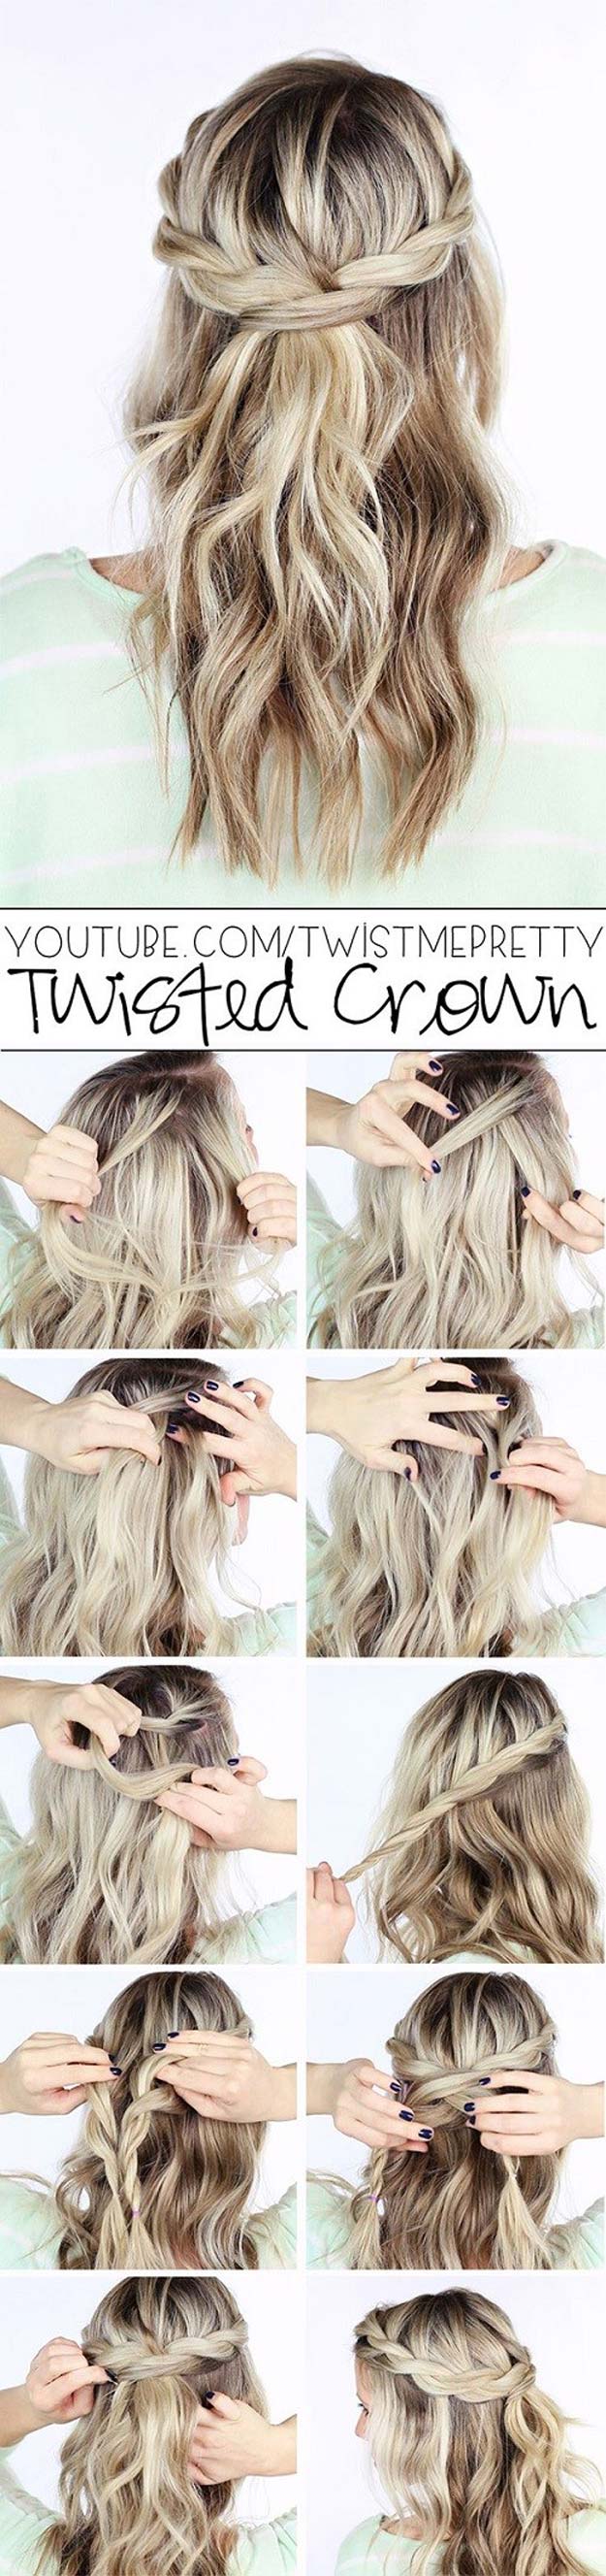 Best Hair Braiding Tutorials - Twisted Crown Braid Tutorial - Easy Step by Step Tutorials for Braids - How To Braid Fishtail, French Braids, Flower Crown, Side Braids, Cornrows, Updos - Cool Braided Hairstyles for Girls, Teens and Women - School, Day and Evening, Boho, Casual and Formal Looks #hairstyles #braiding #braidingtutorials #diyhair 